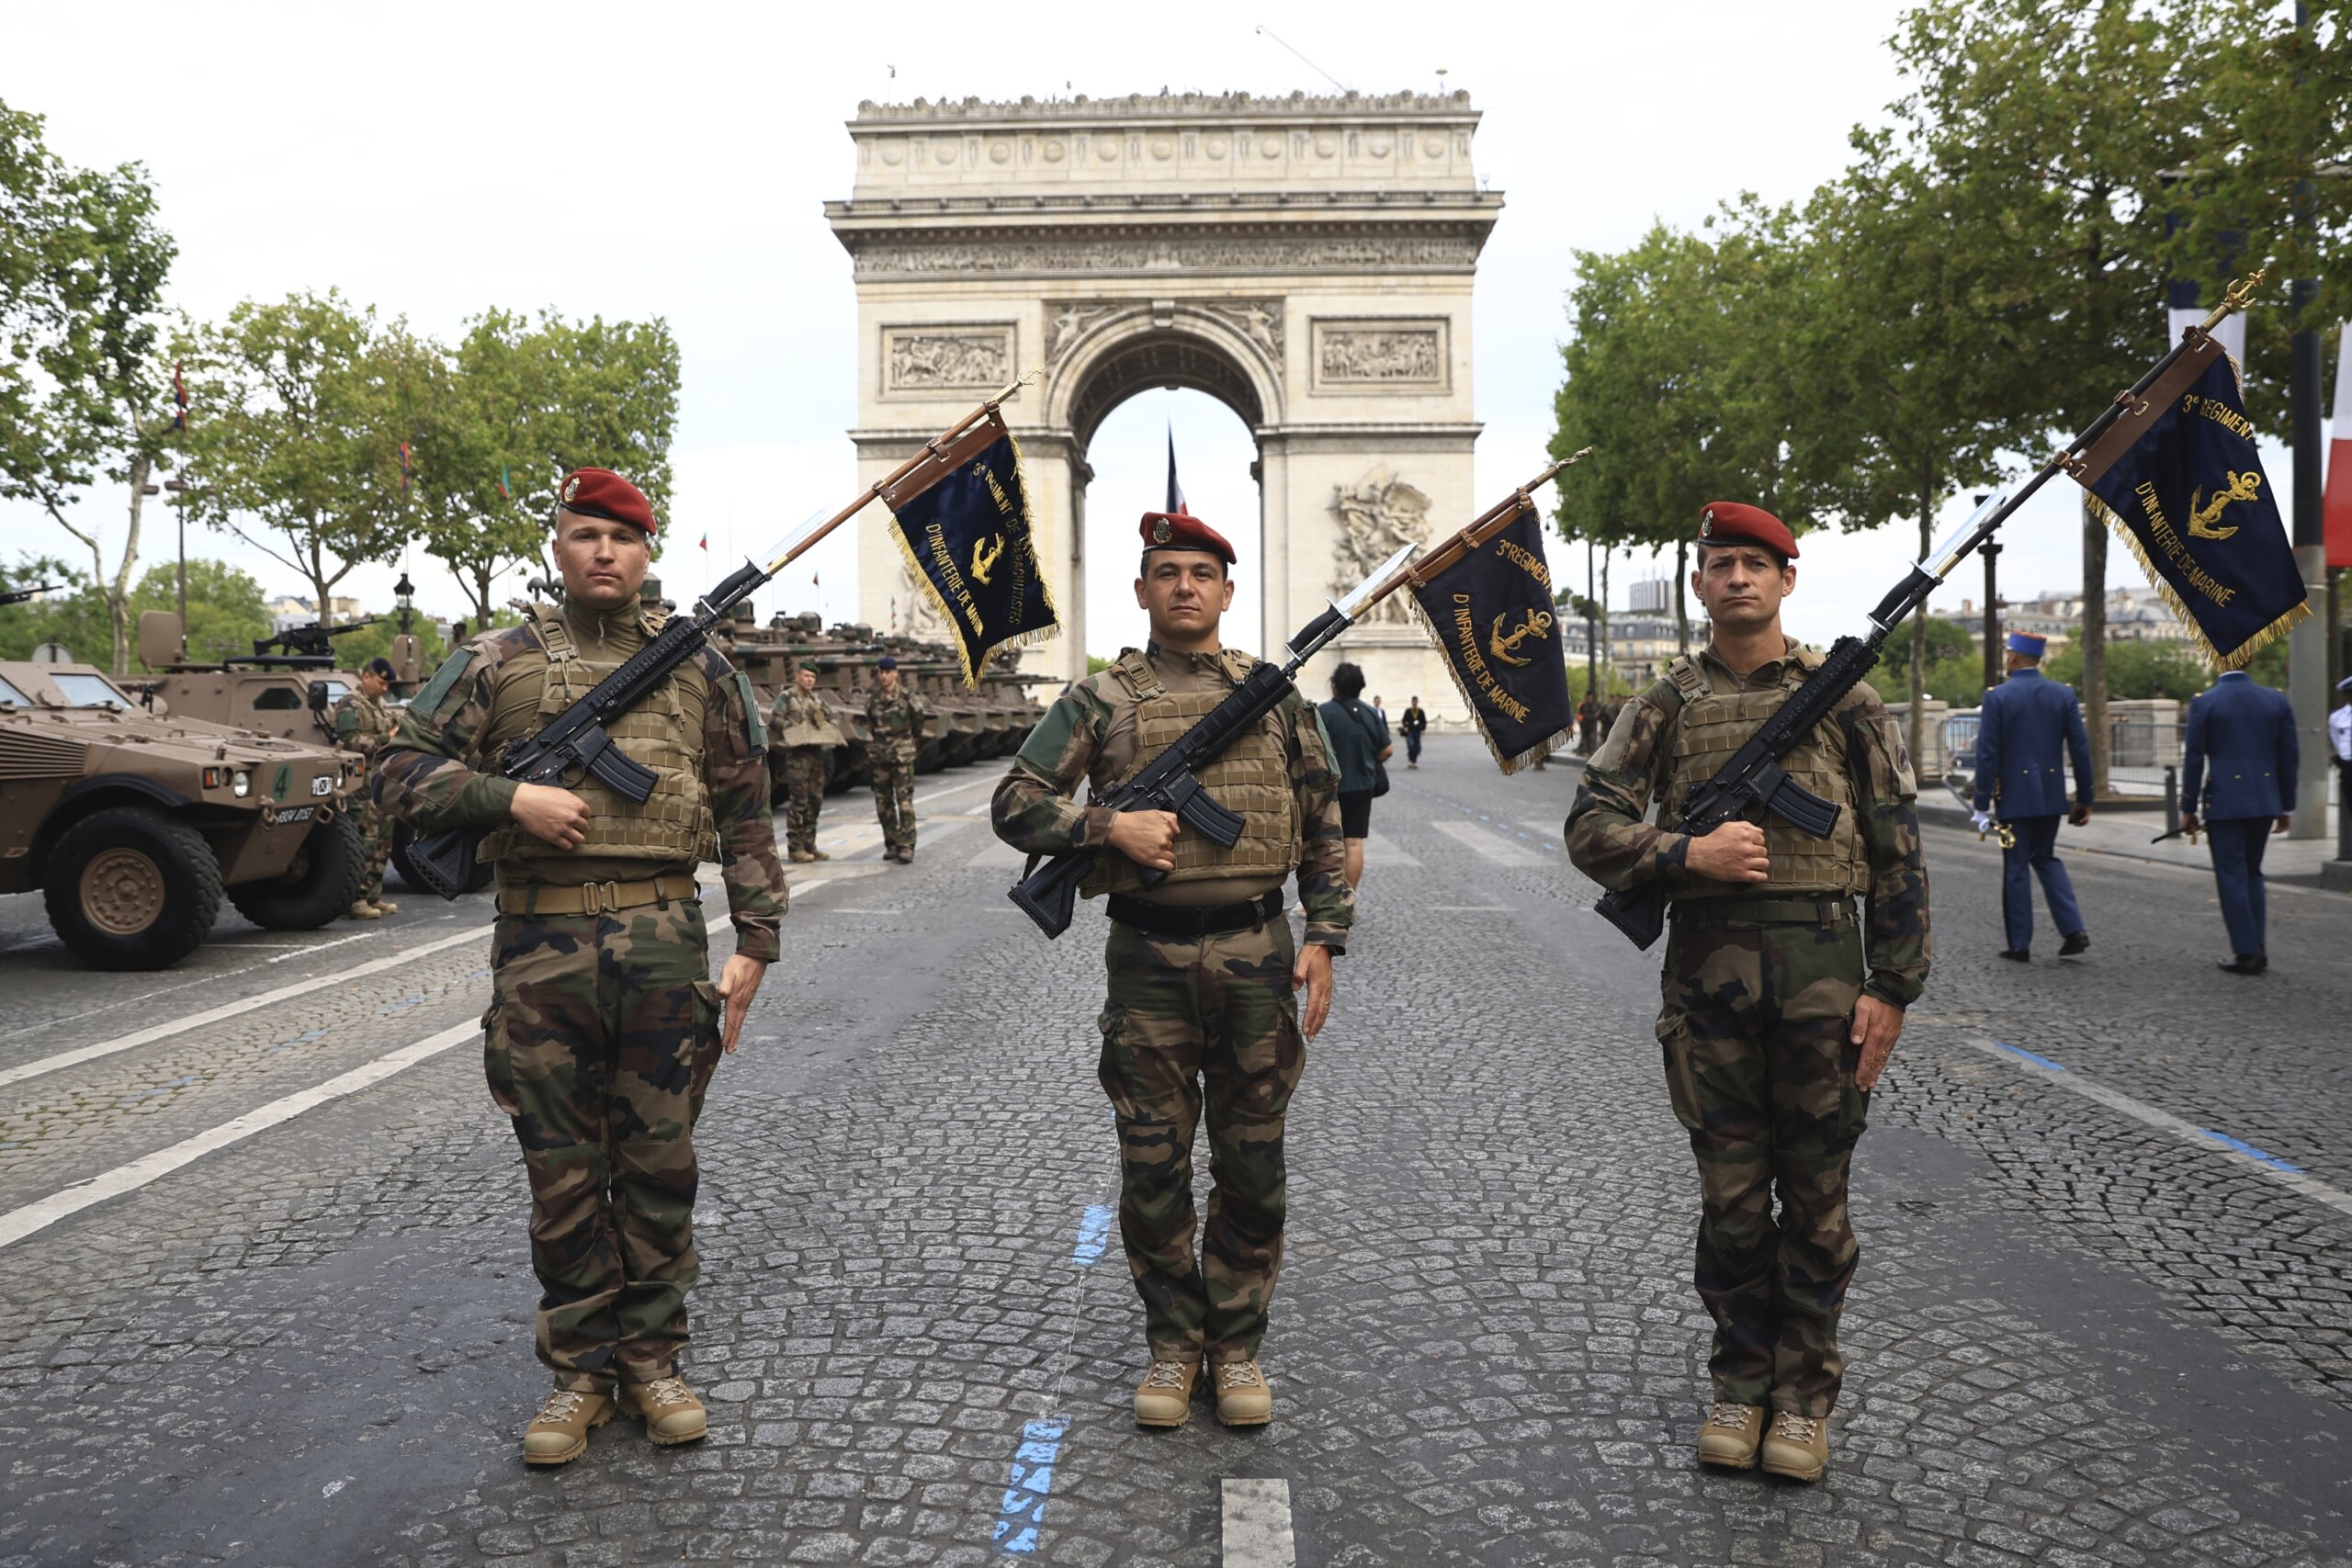 France celebrates Bastille Day with parades and parties - and extra ...